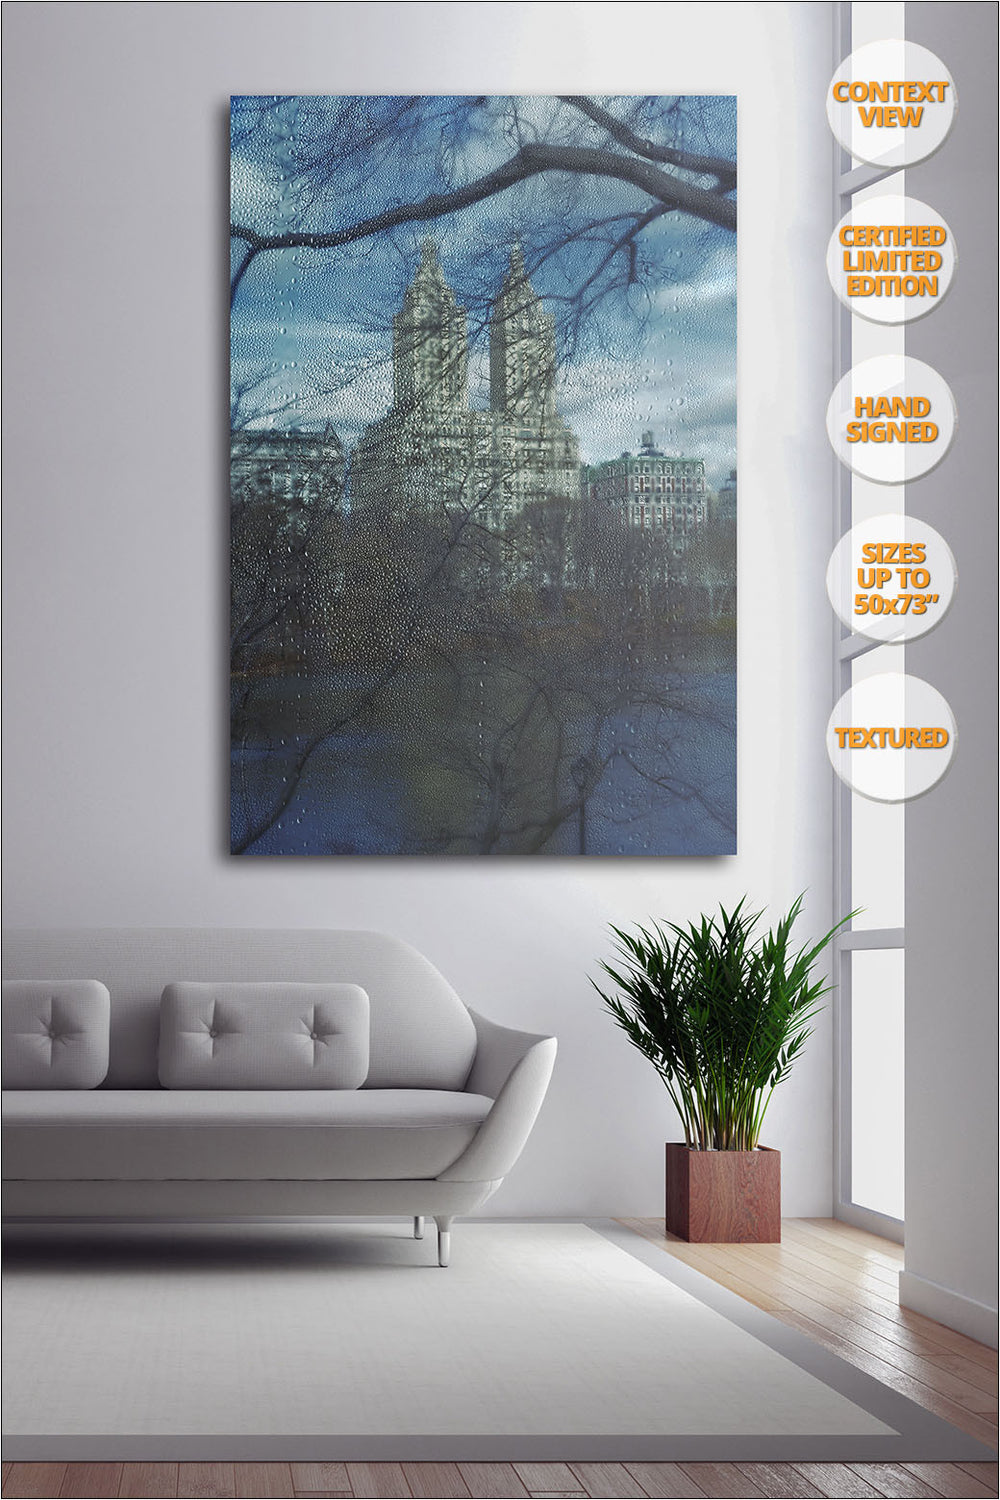 The San Remo from Central Park in Winter, New York. | Limited Edition Print hanged in living room.